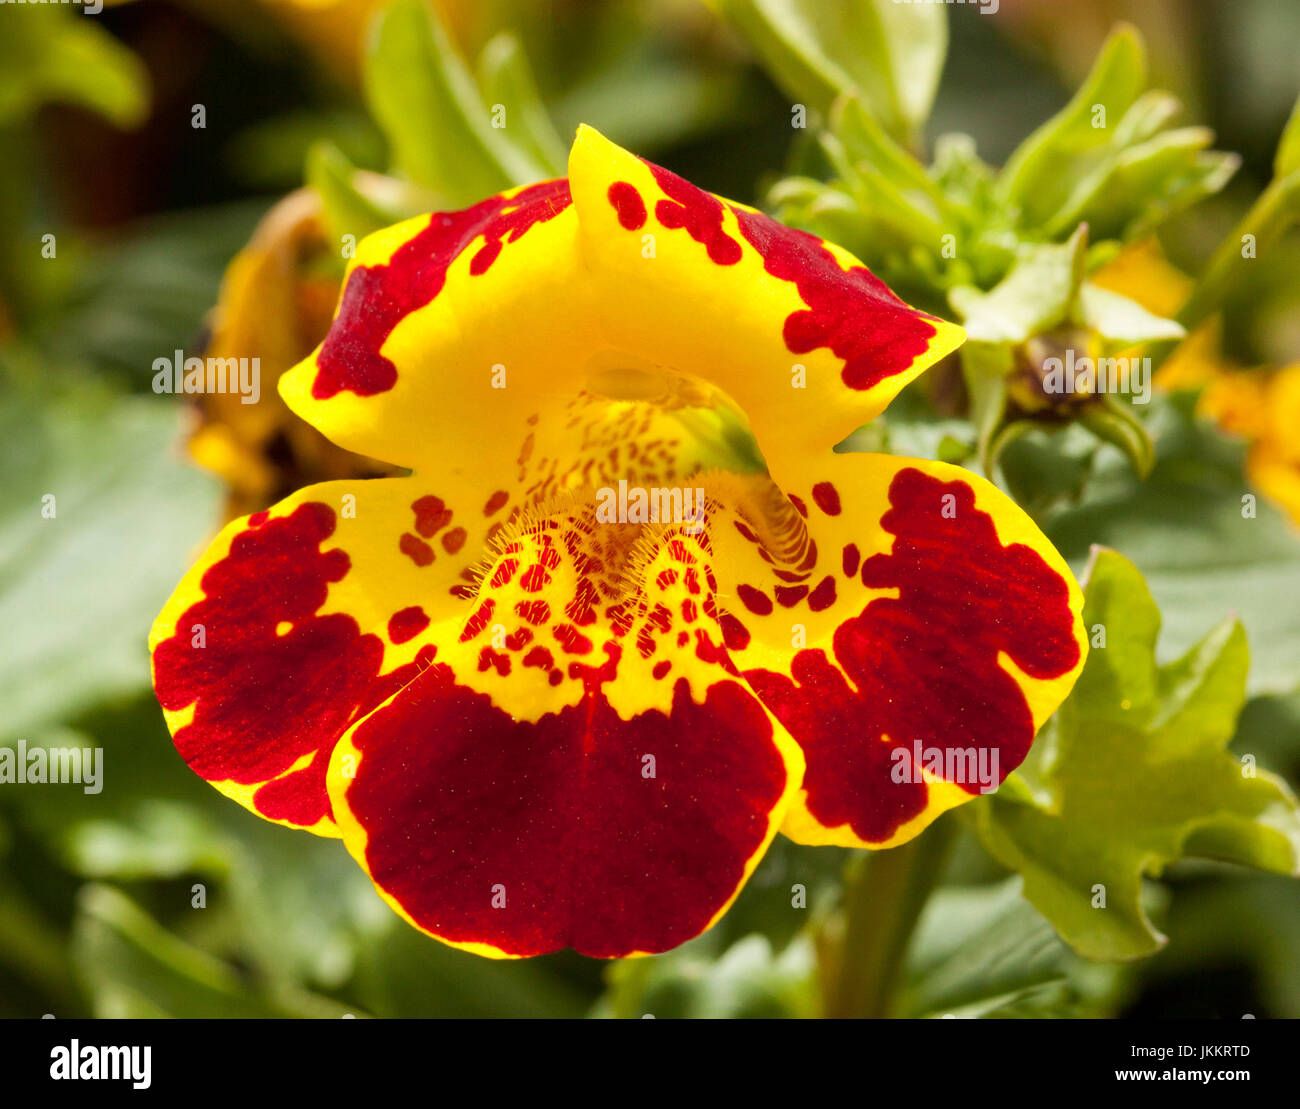 Stunning dark red flowers speckled with yellow of Mimulus Masterpiece, monkey flower, a perennial bedding plant, on background of green leaves Stock Photo